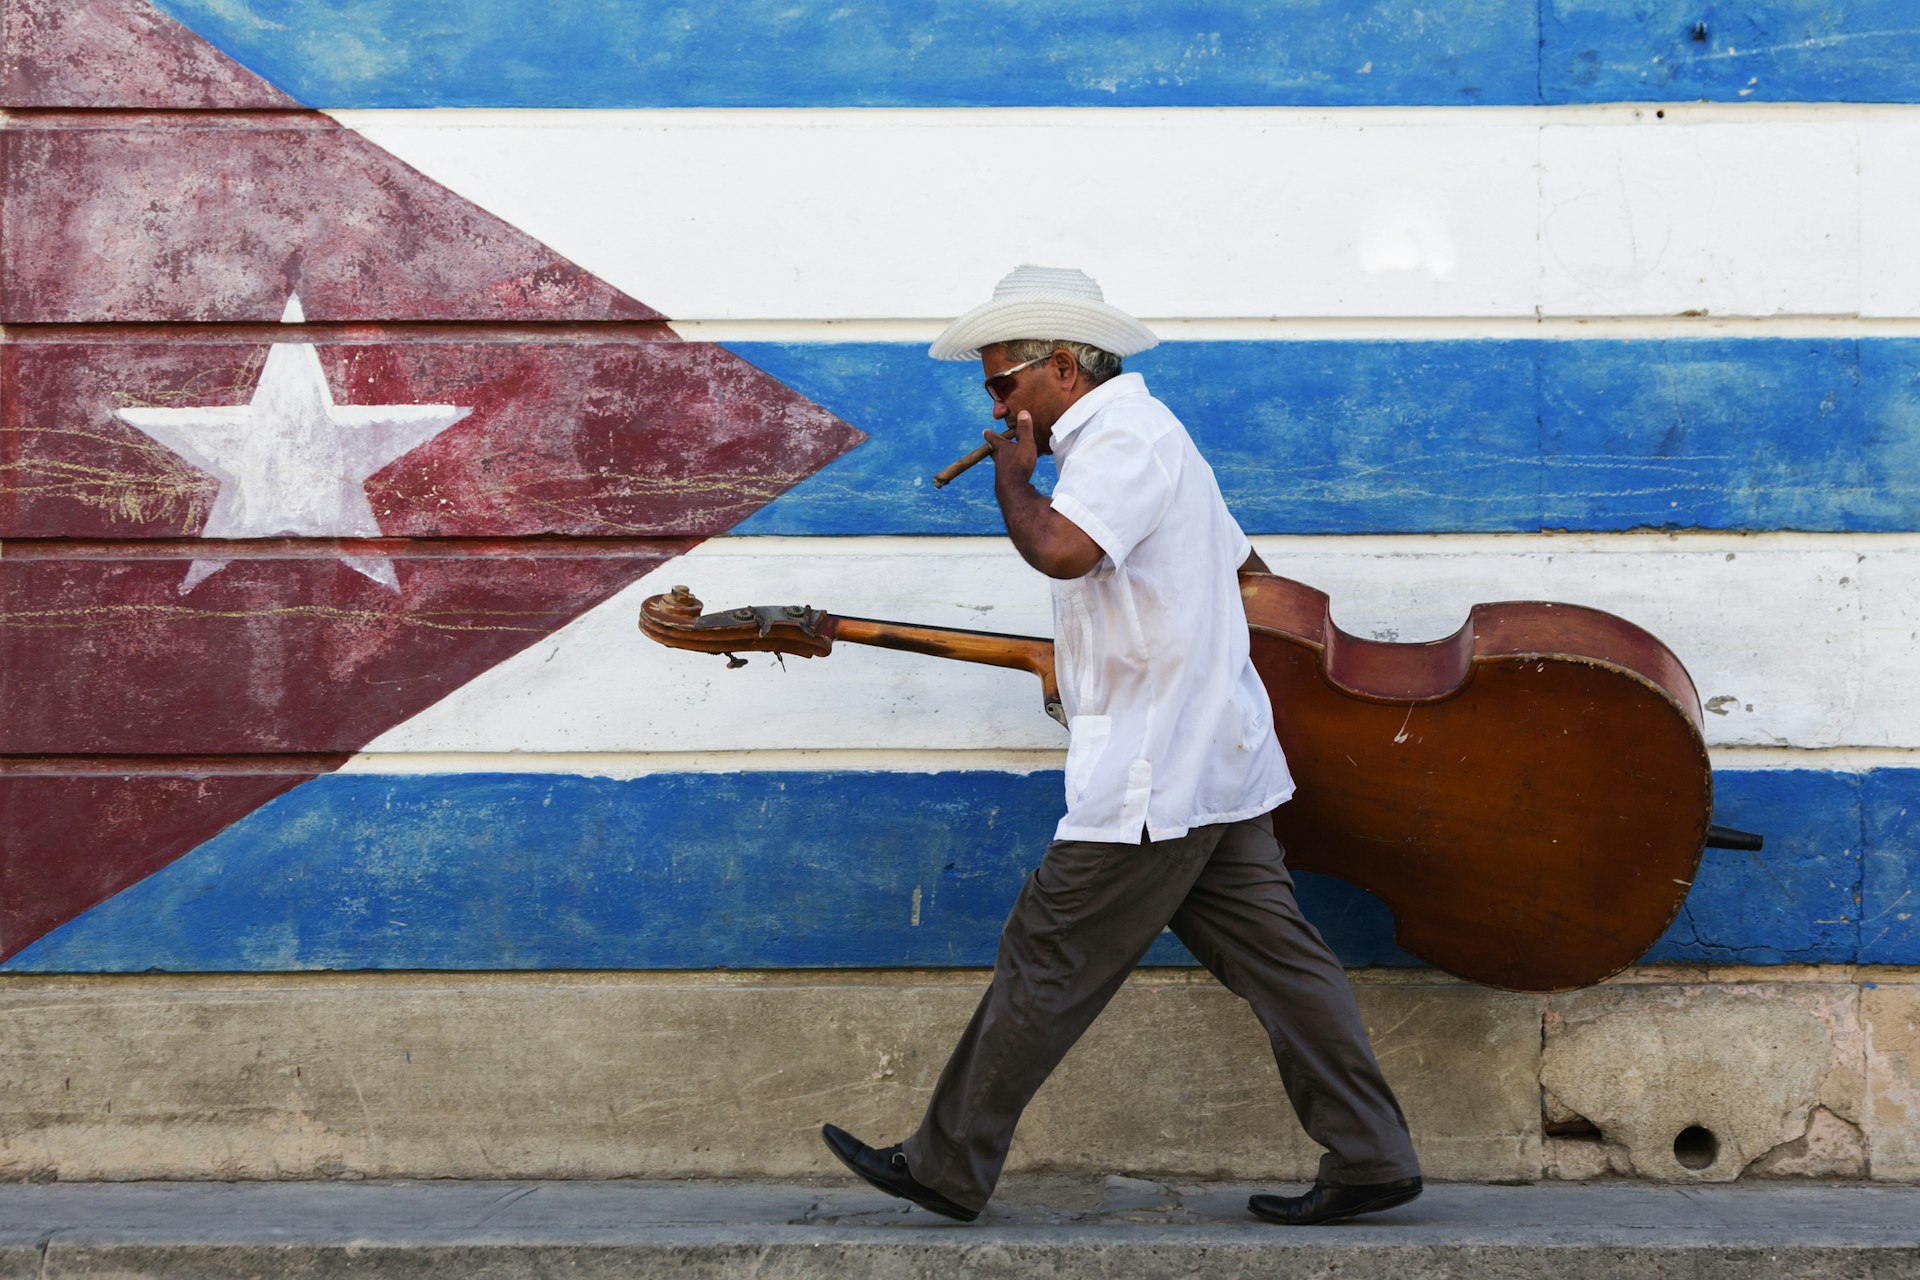 A man carrying a large bass instrument smokes a cigar as he walks by a Cuban flag painted on a wall